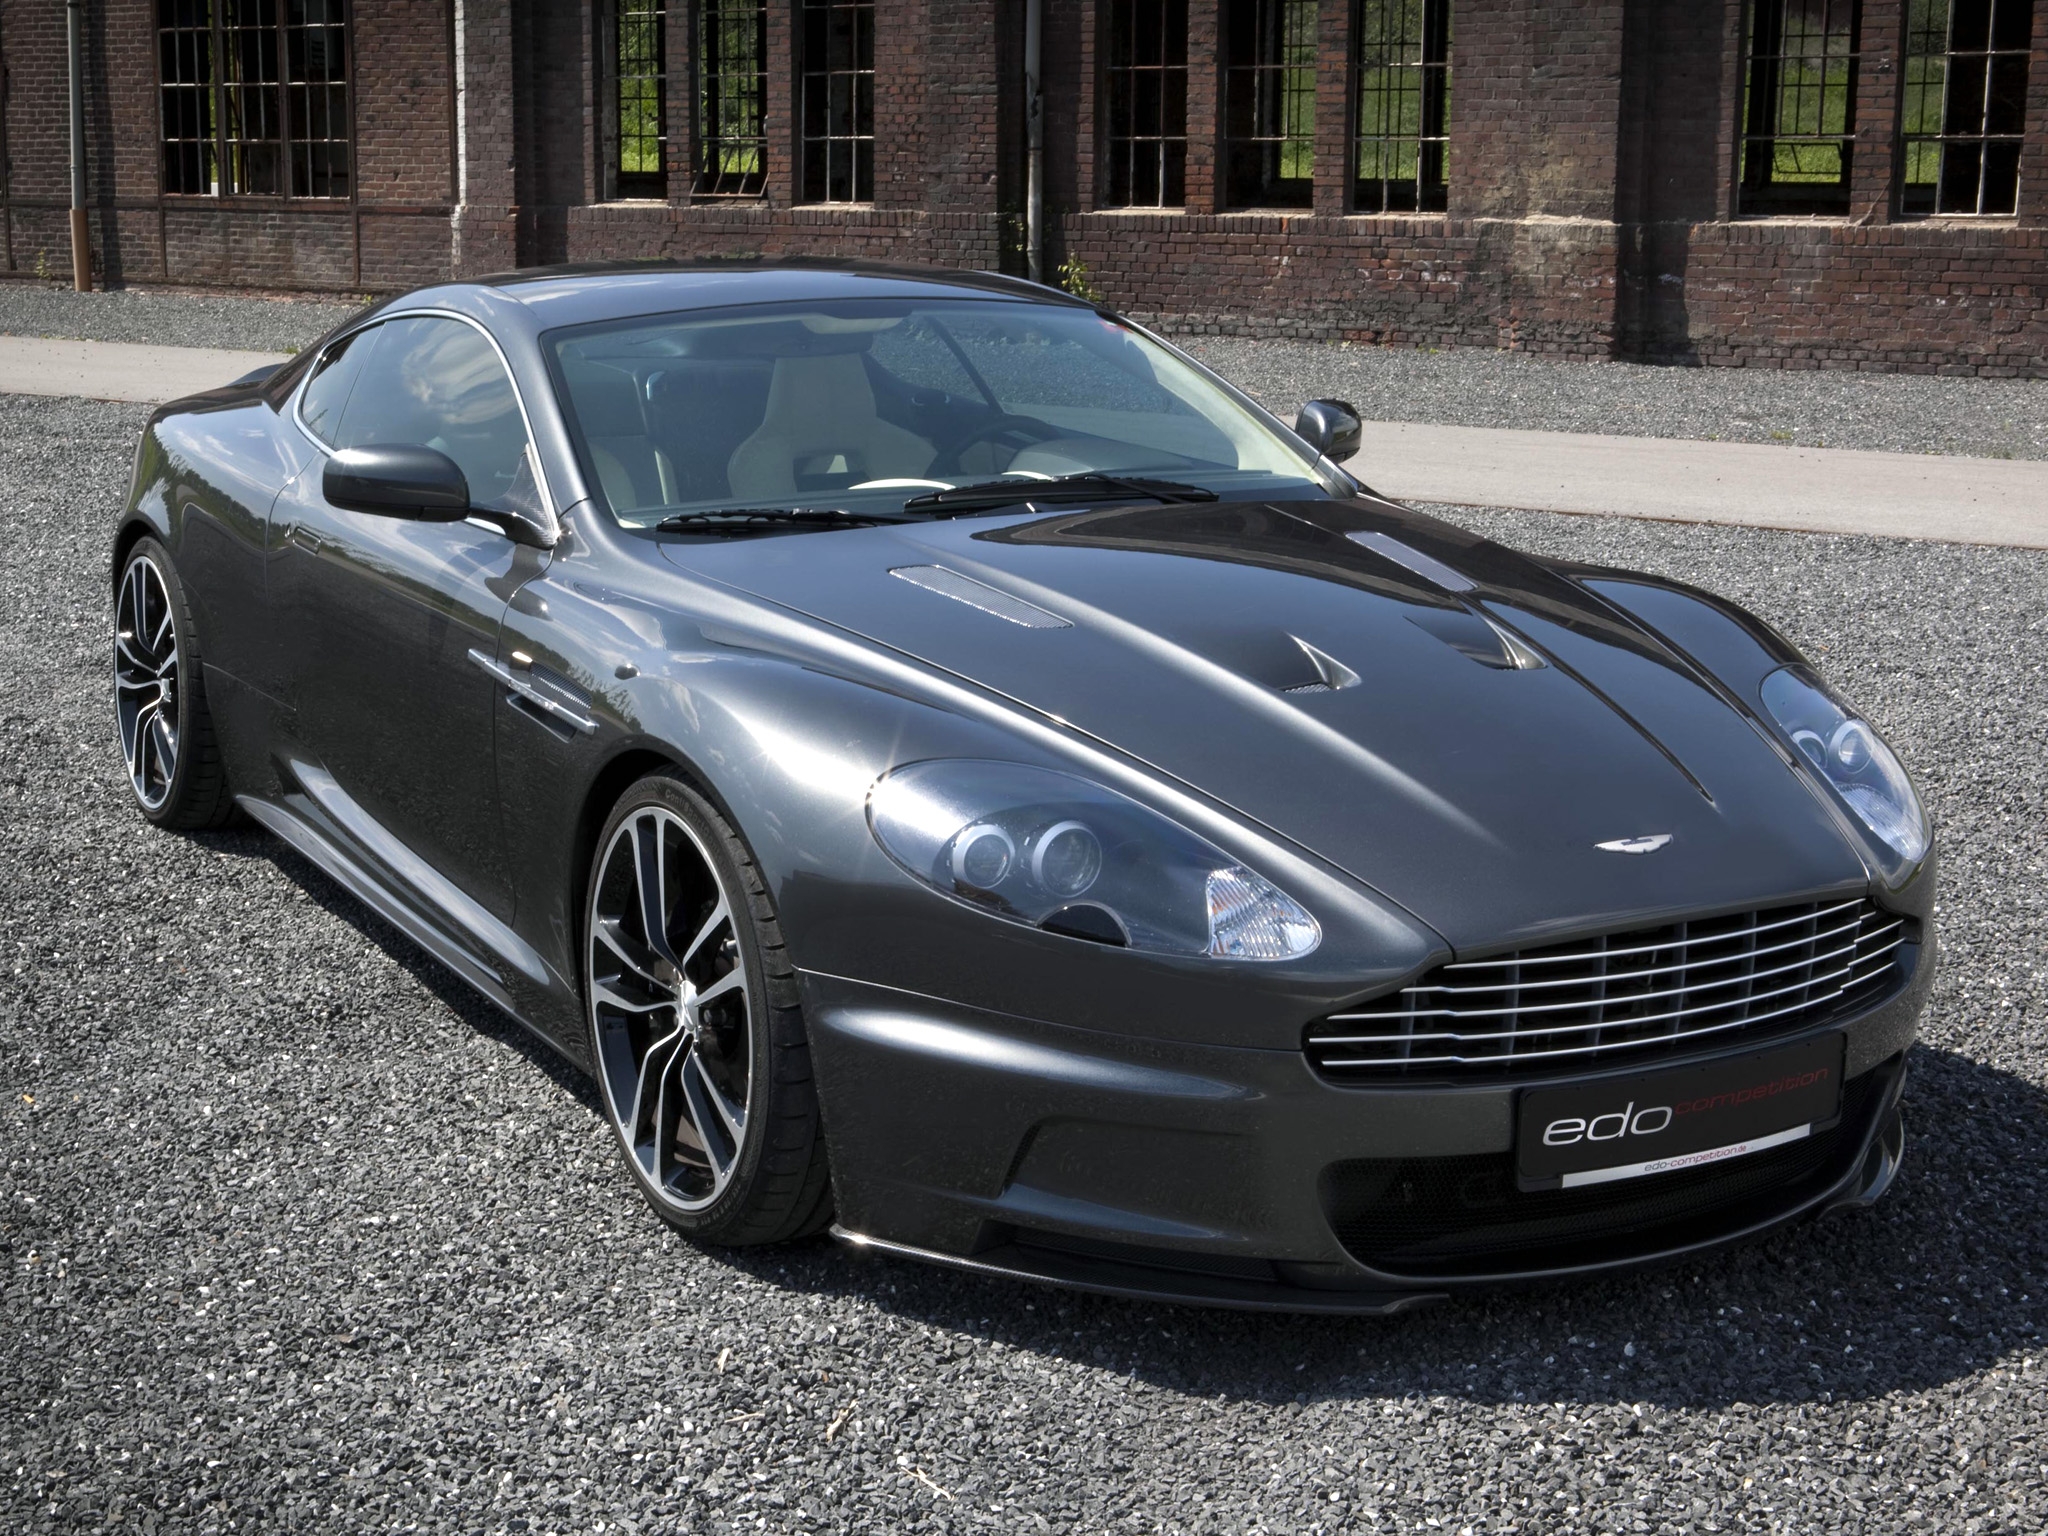 PC Wallpapers auto, aston martin, cars, front view, grey, dbs, 2010, gravel